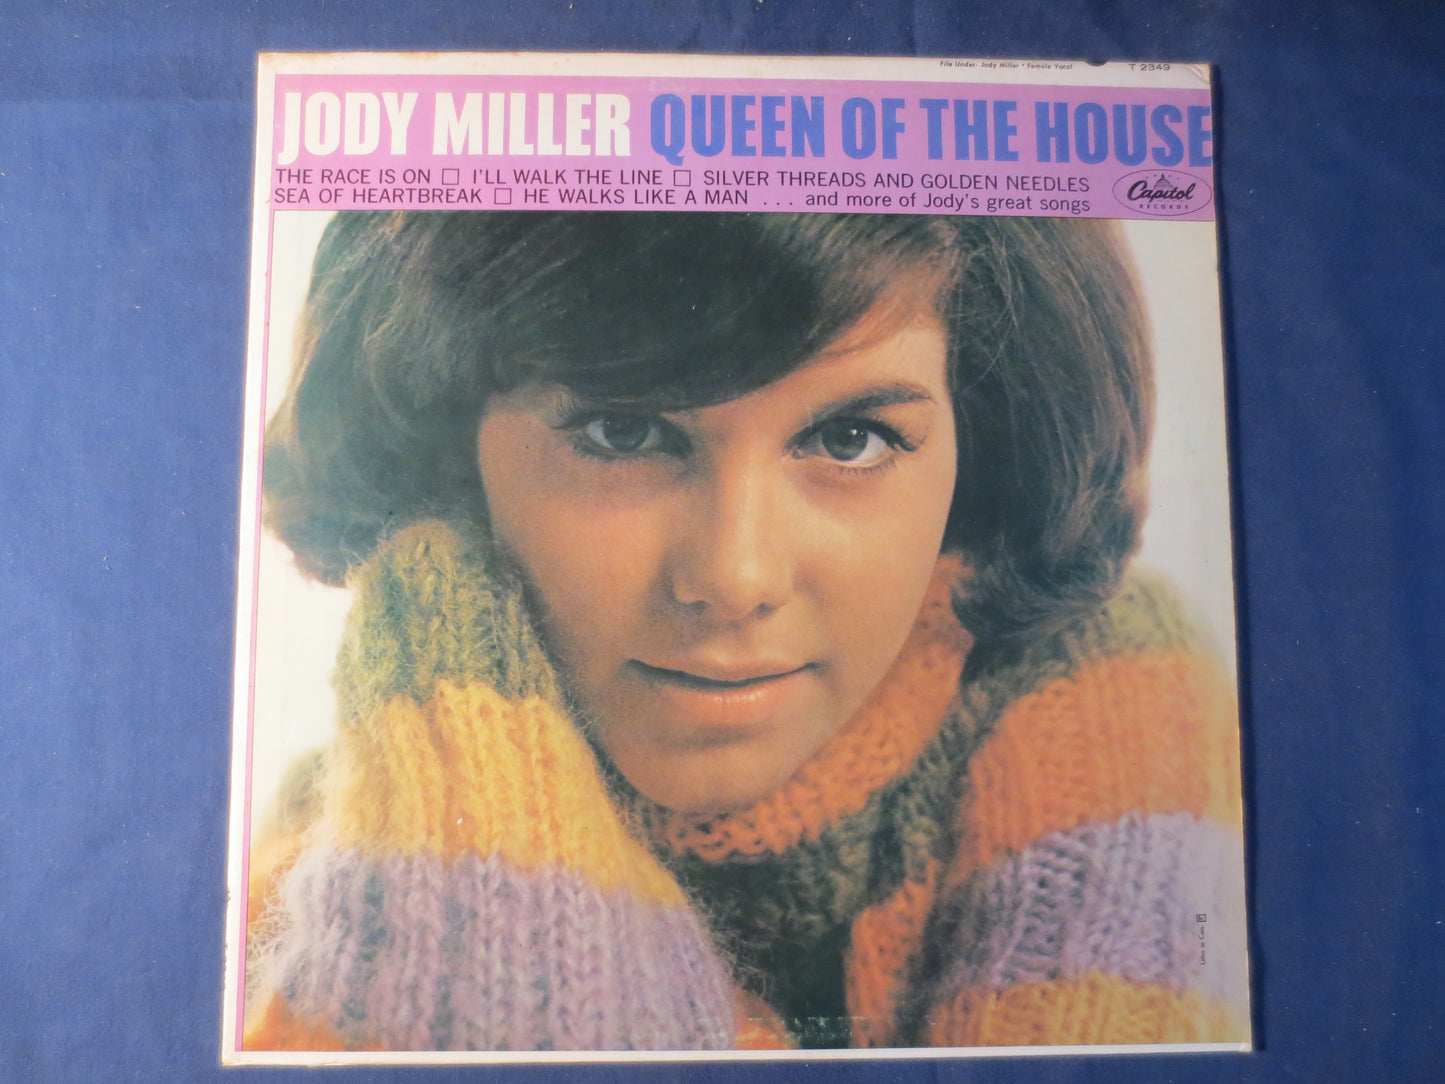 JODY MILLER, QUEEN of the House, Country Records, Jody Miller Record, Jody Miller Album, Jody Miller Lp, Lp, 1965 Records